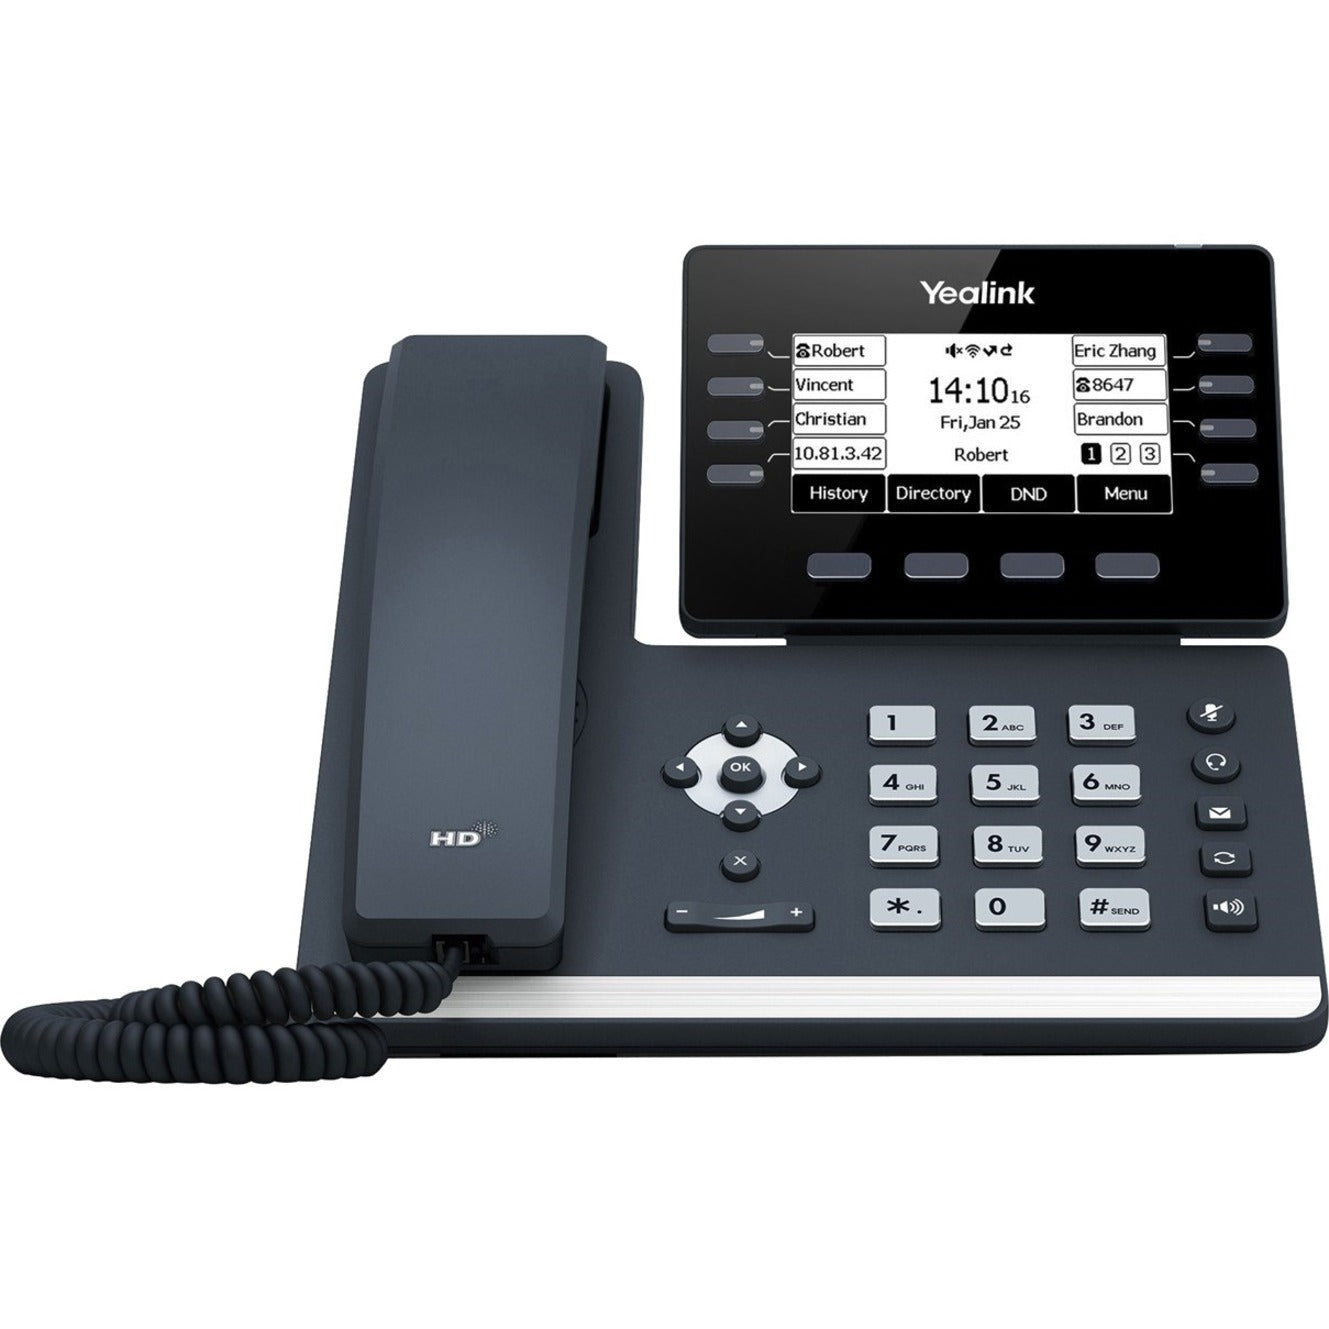 Yealink SIP-T53W Prime Business Phone with 3.7 Graphical LCD Screen, Built-In Bluetooth 4.2